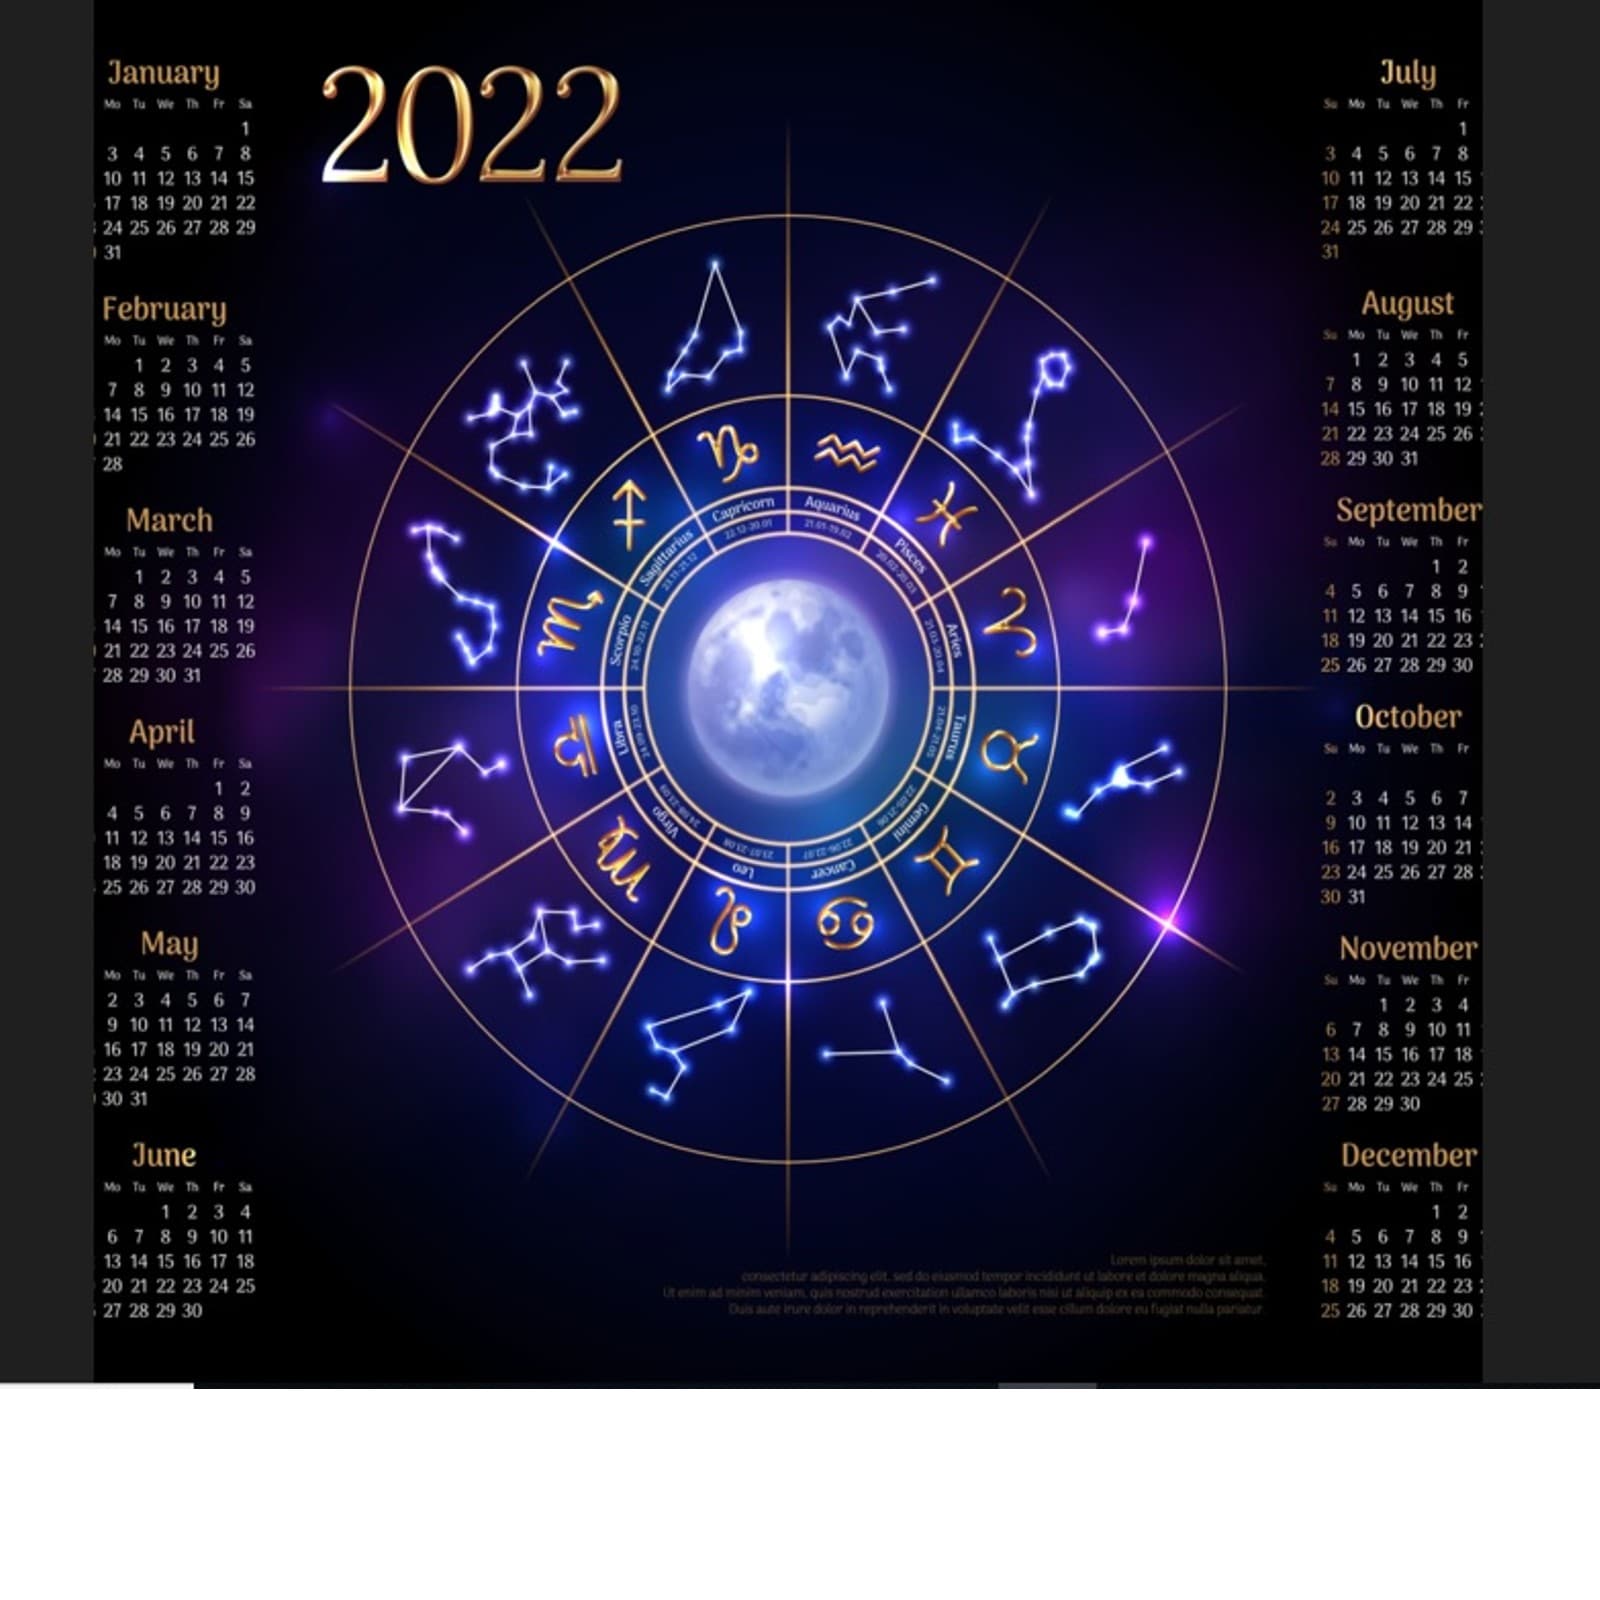 zodiac signs and dates 2022